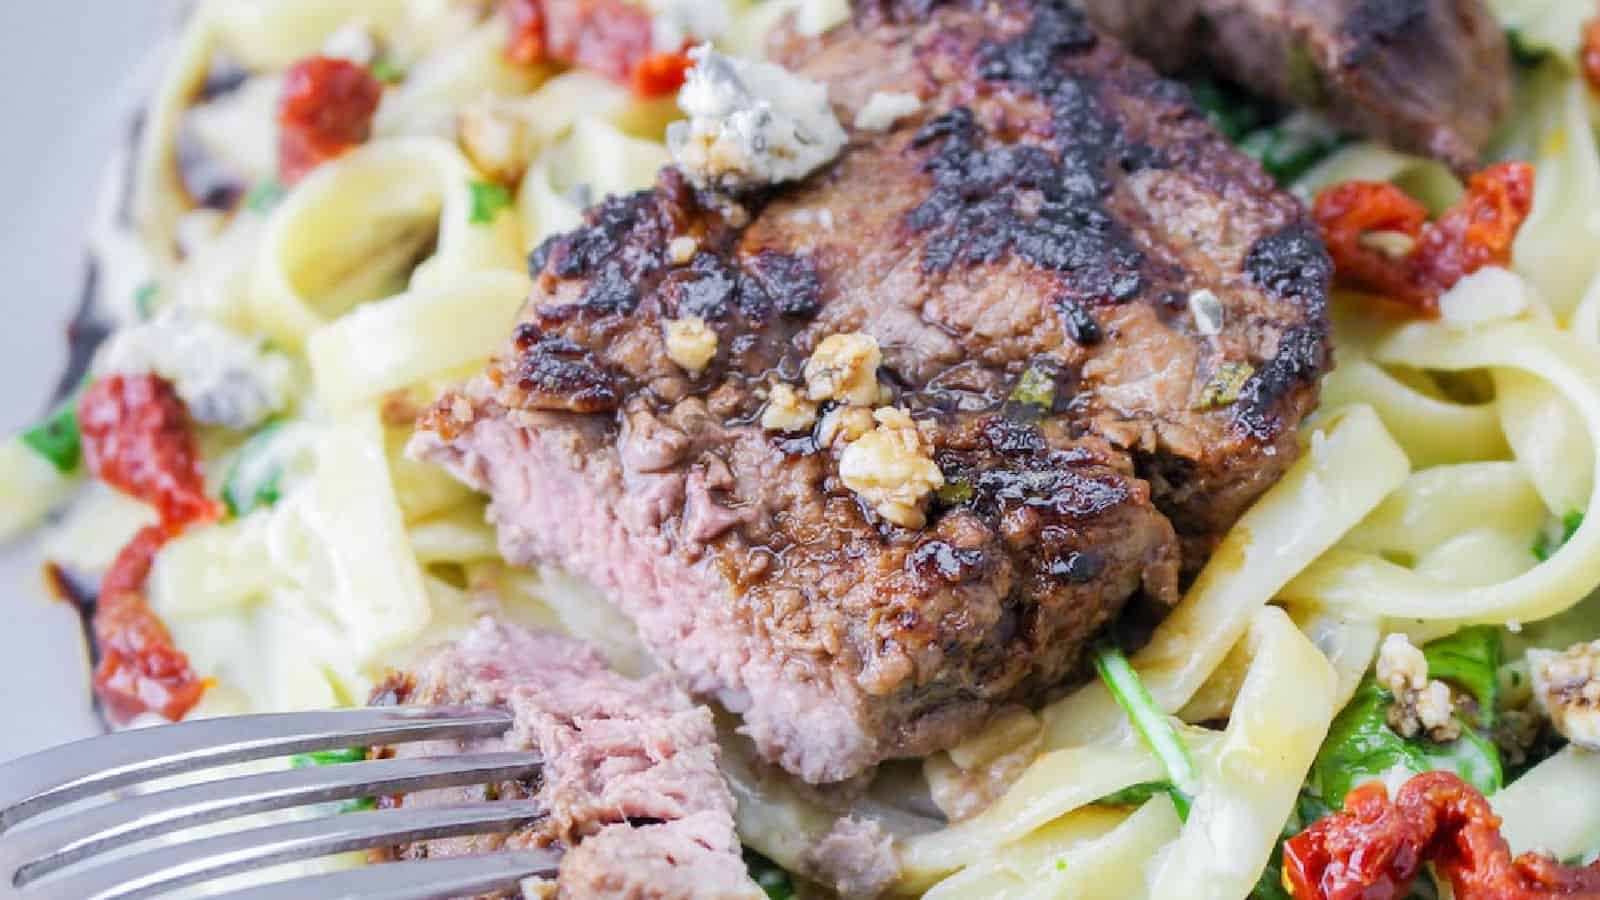 Succulent steak served with rich gorgonzola sauce, a tantalizing preview of the Copycat Olive Garden recipe, treasured by food enthusiasts everywhere.